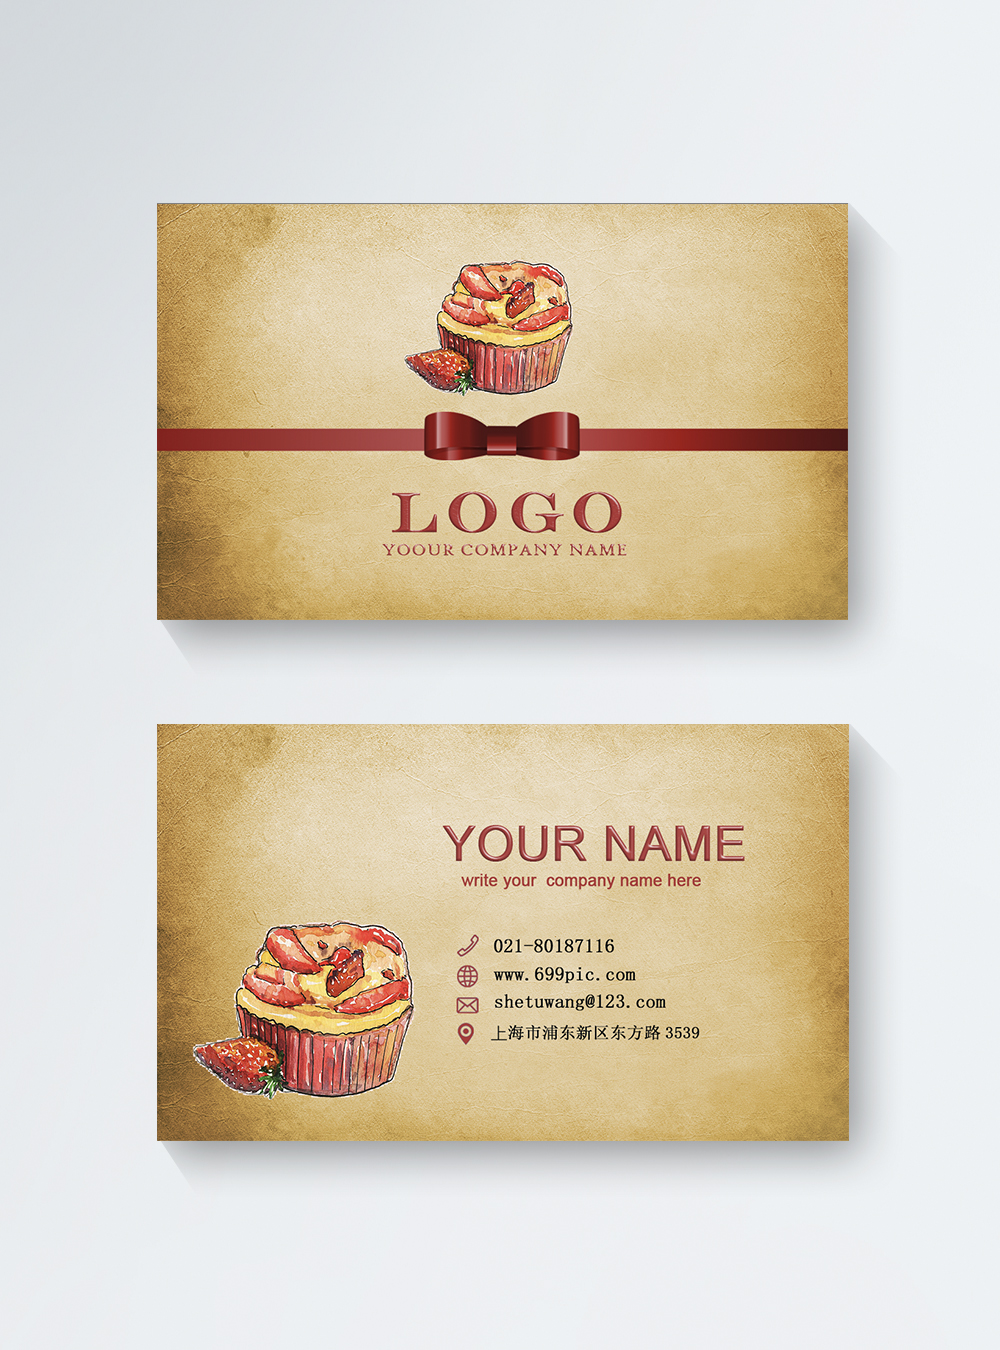 Cake shop business card template image_picture free download Pertaining To Cake Business Cards Templates Free